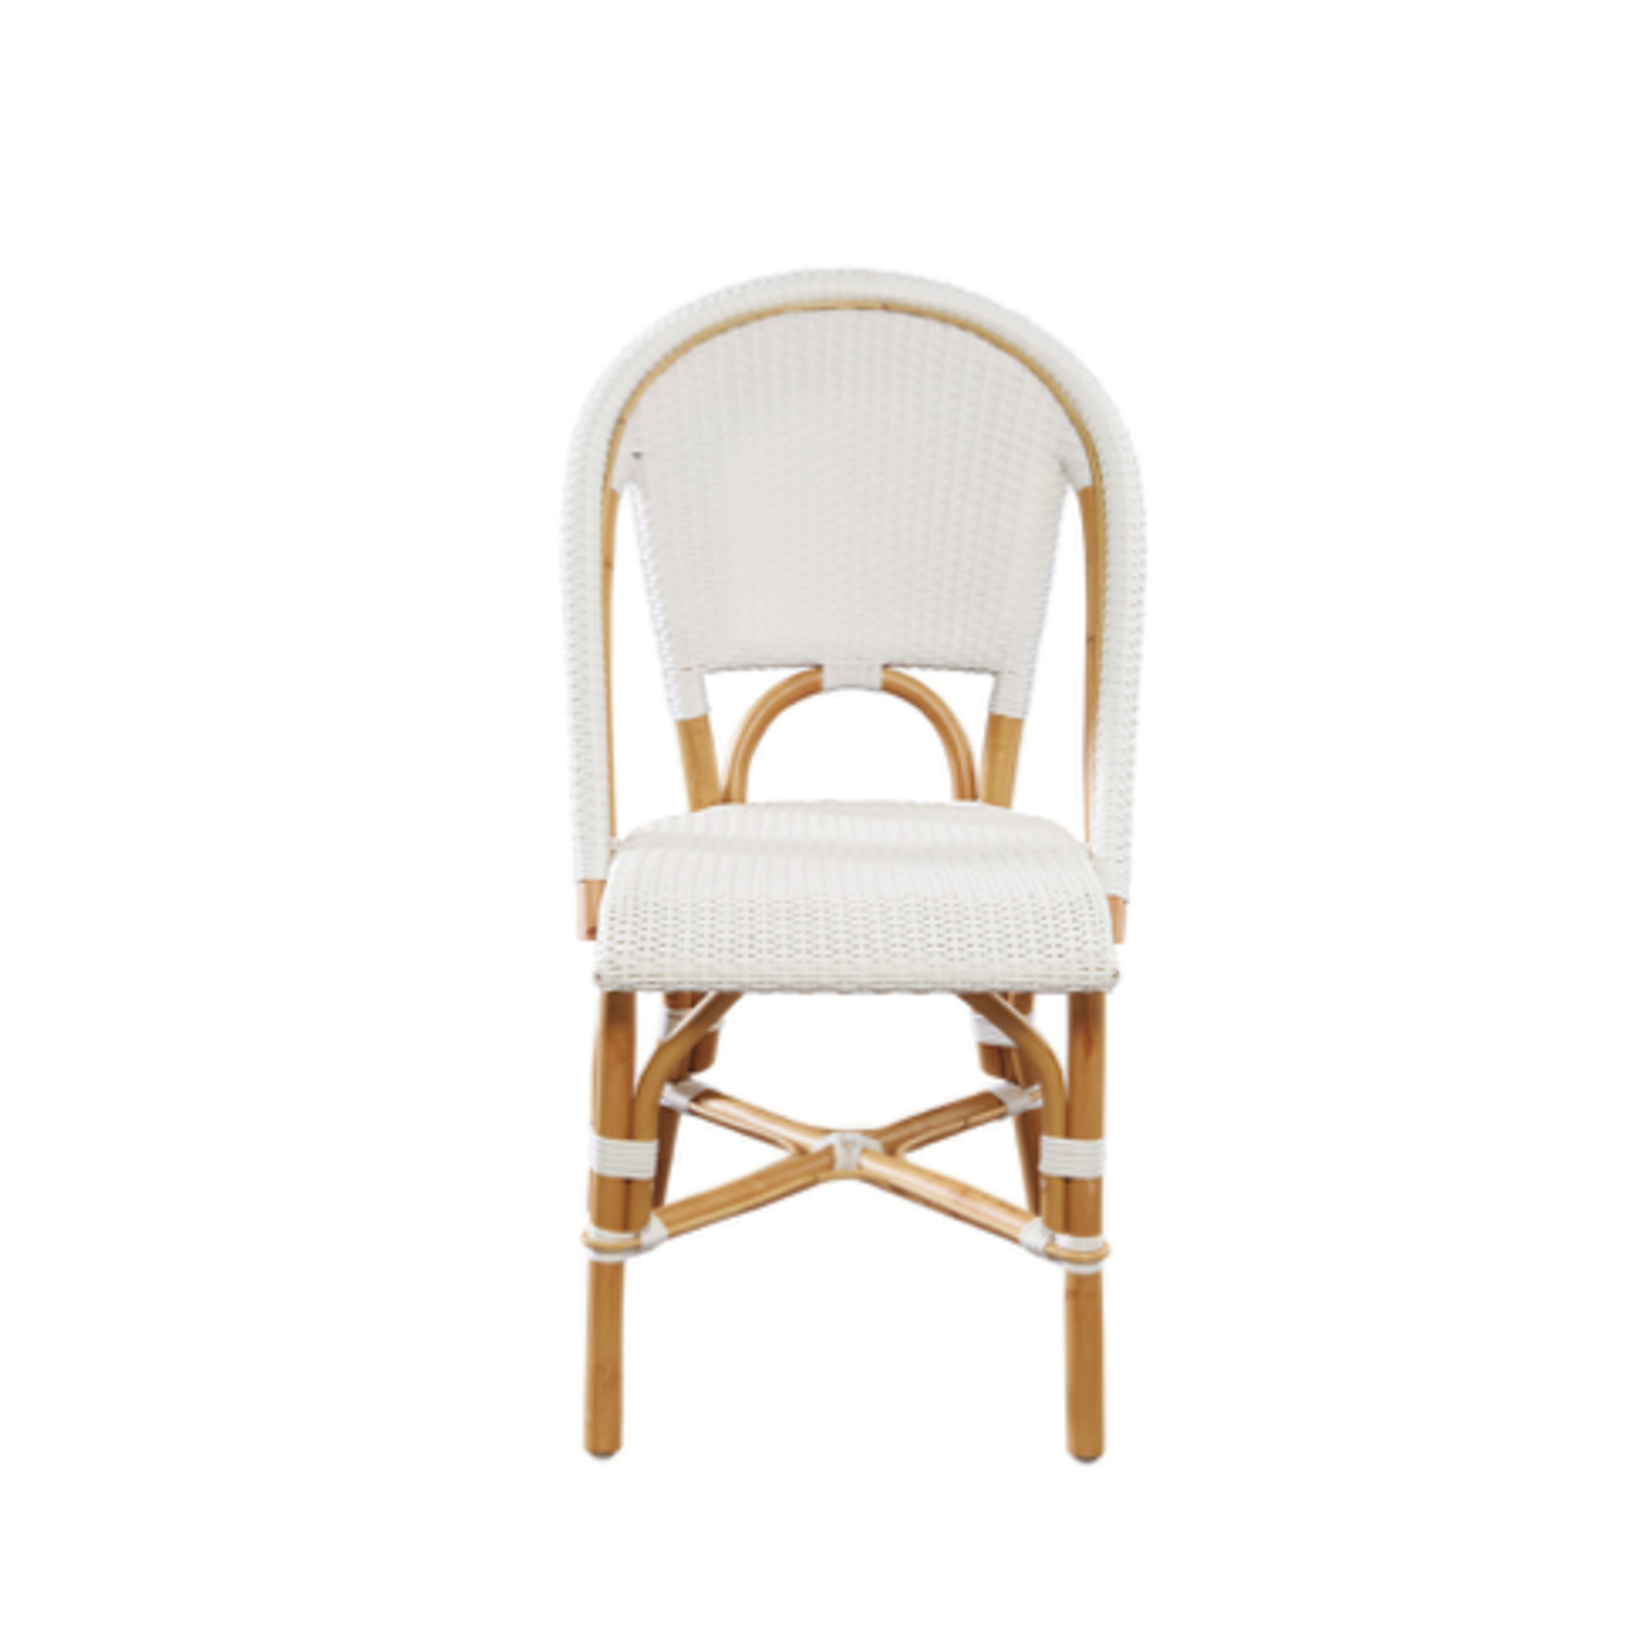 Outside The Box Leroy White Woven & Rattan Dining Chair